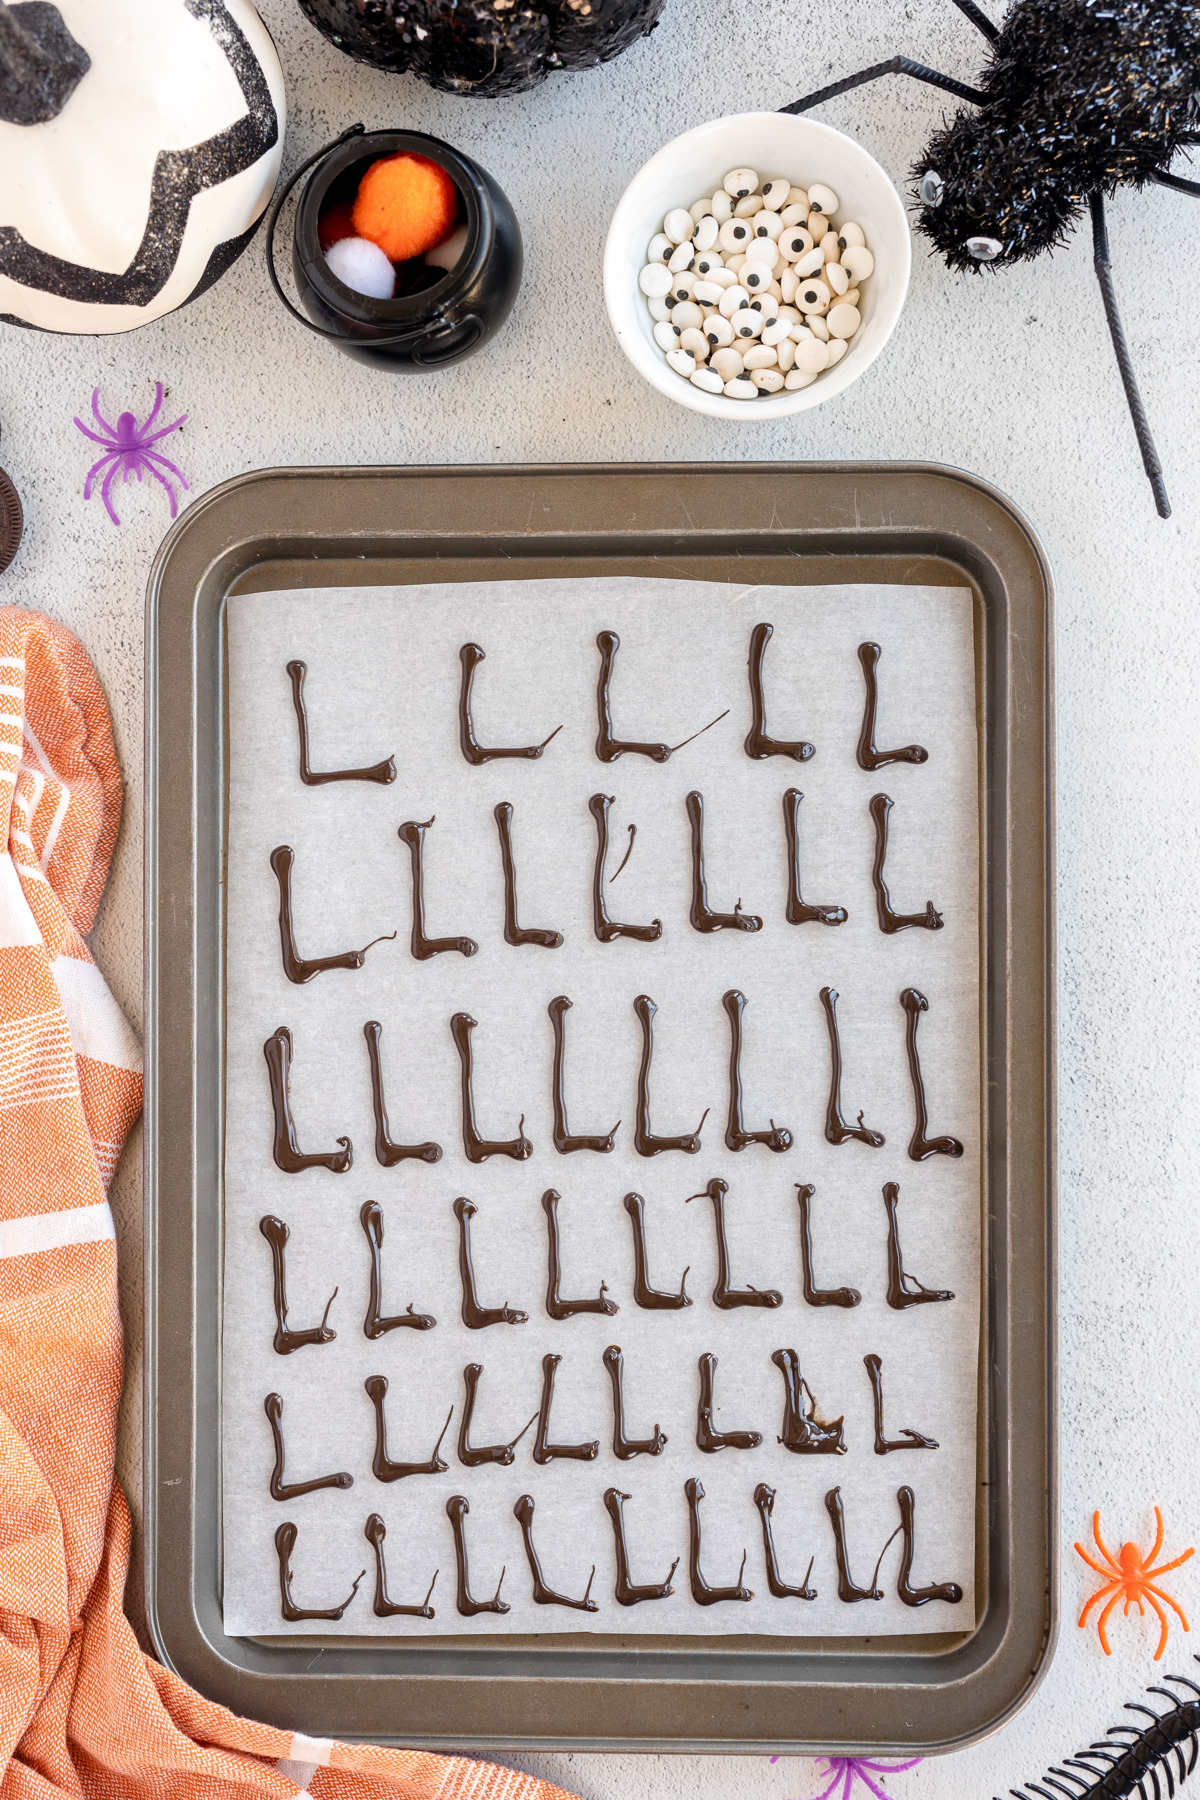 baking sheet with chocolate spider legs